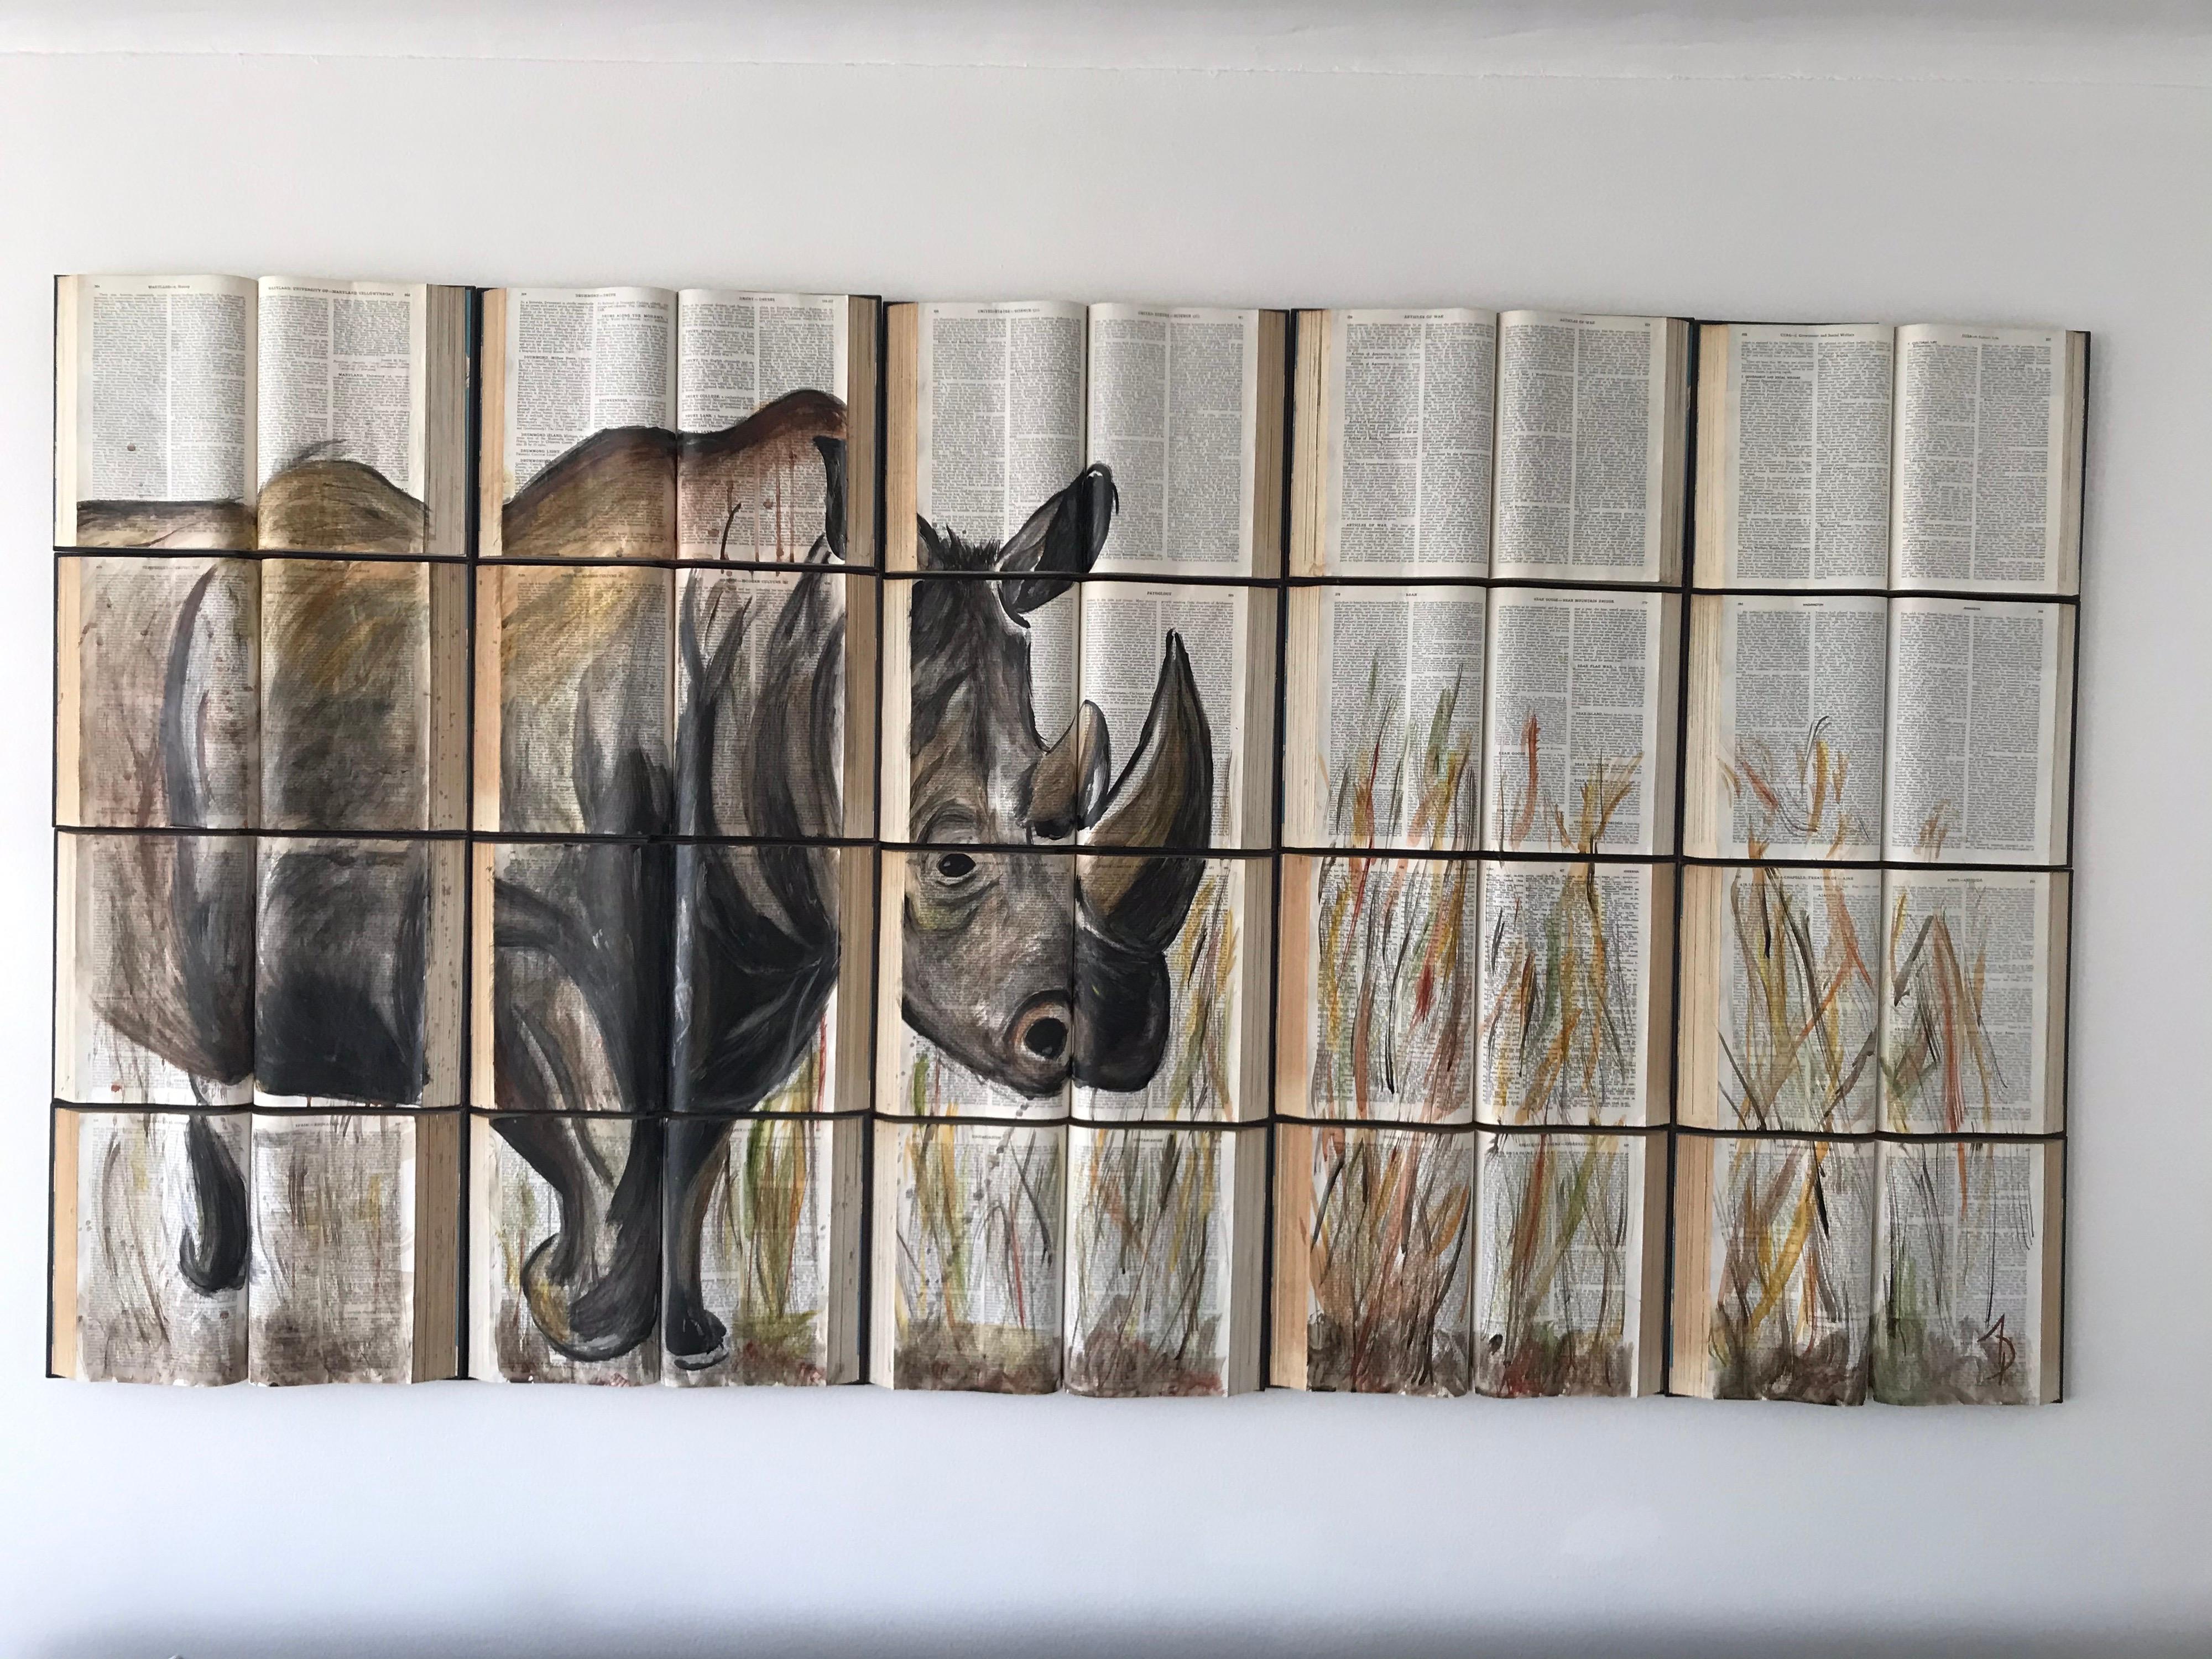 Steppe. Outstanding warm water color rhinoceros  painting   - Painting by Arozarena De La Fuente